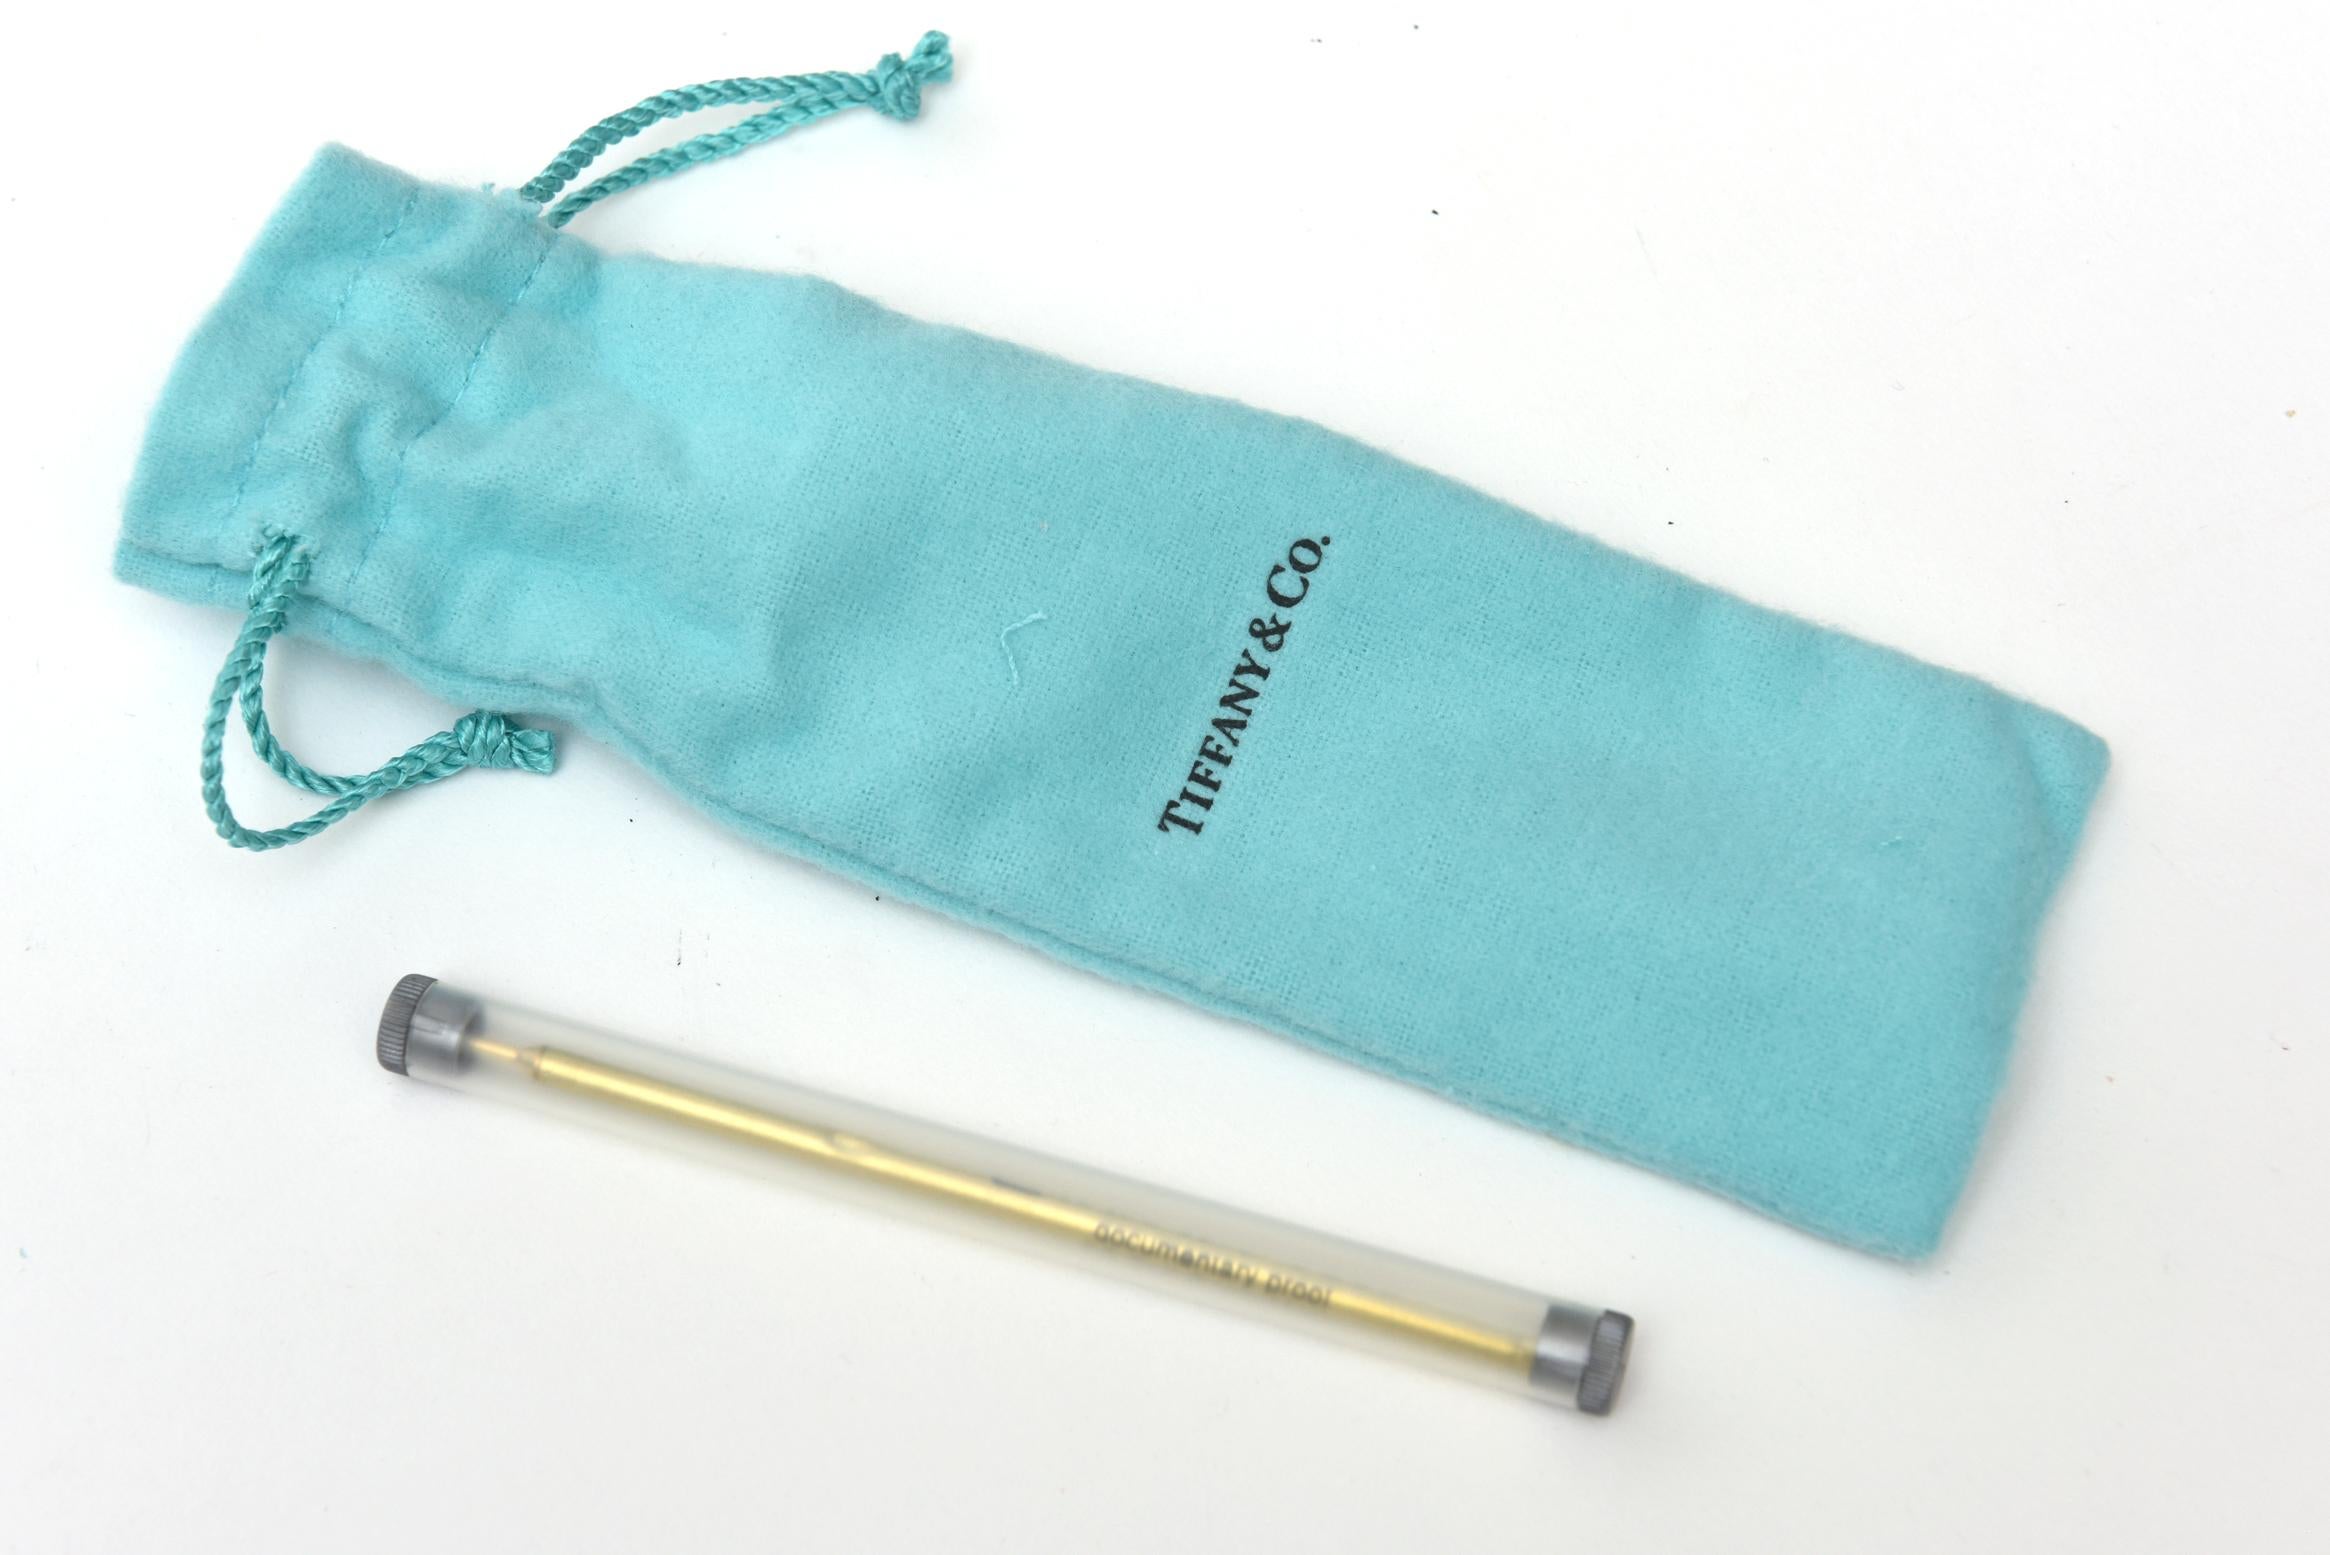 Tiffany & Co. Sterling Silver and 18-Karat Gold Pen by Jean Schlumberger Vintage For Sale 1